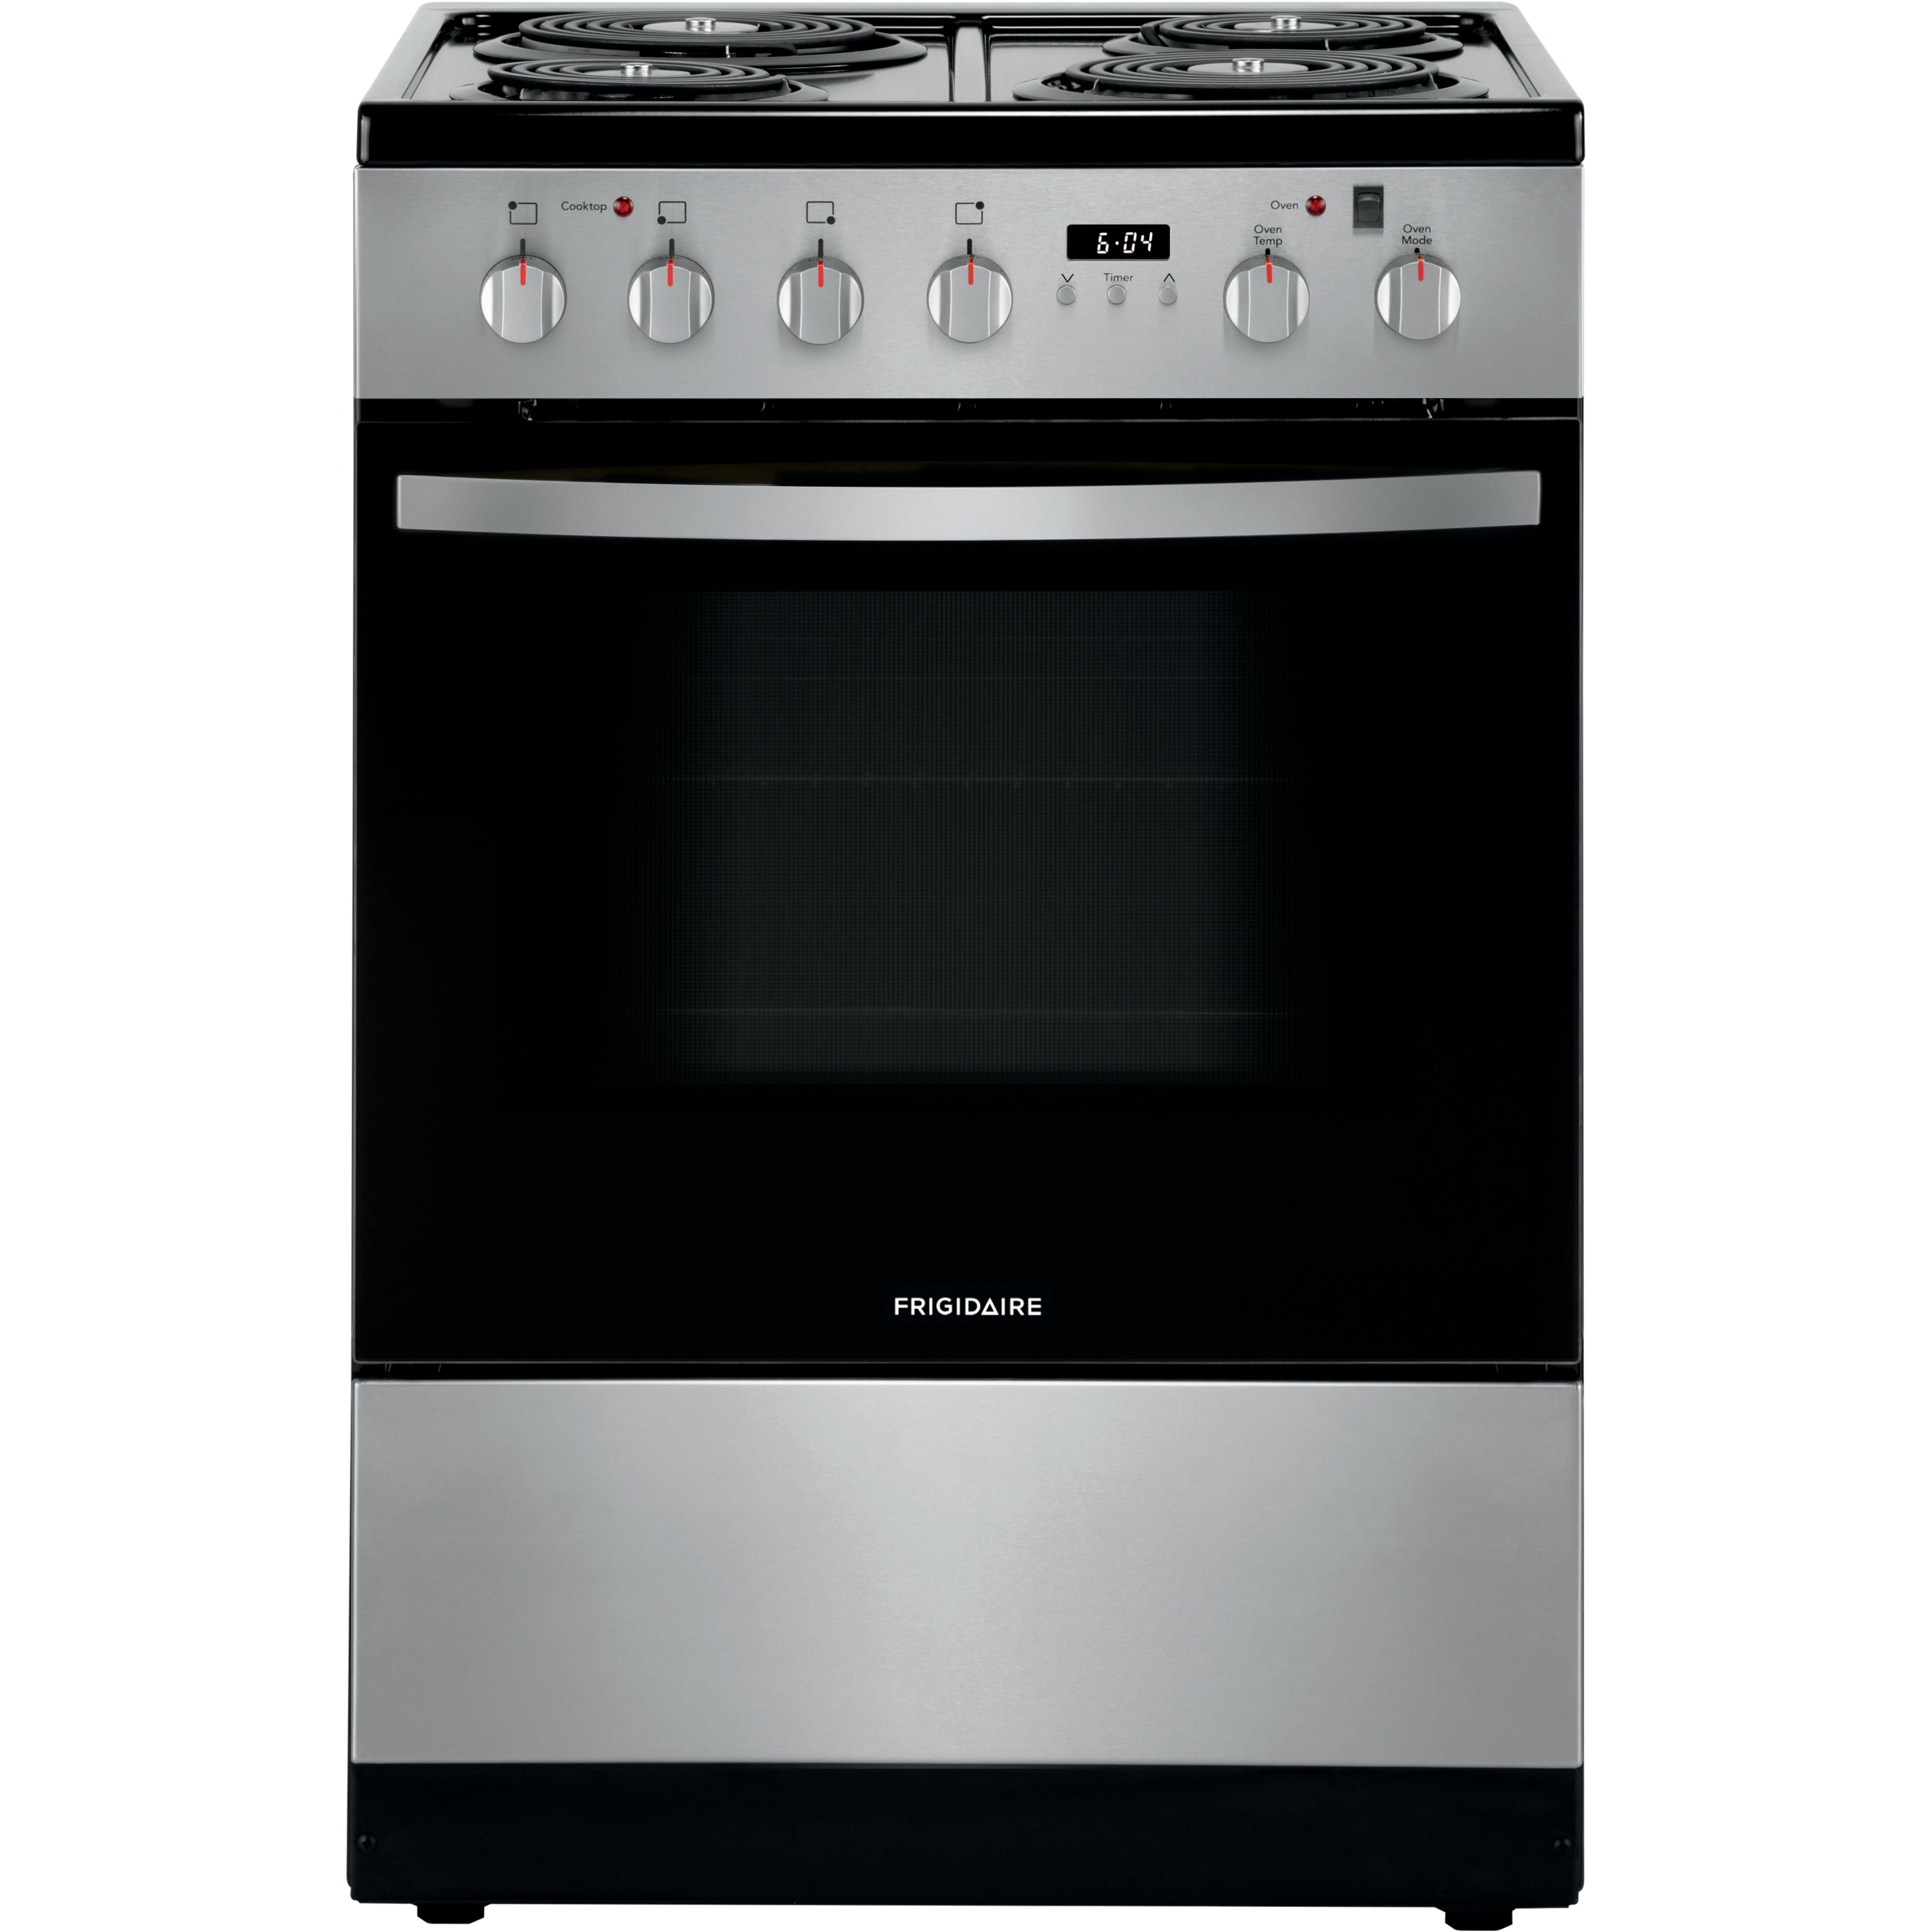 Frigidaire 24-inch Freestanding Electric Range with Ready-Select? Controls FFEH2422US